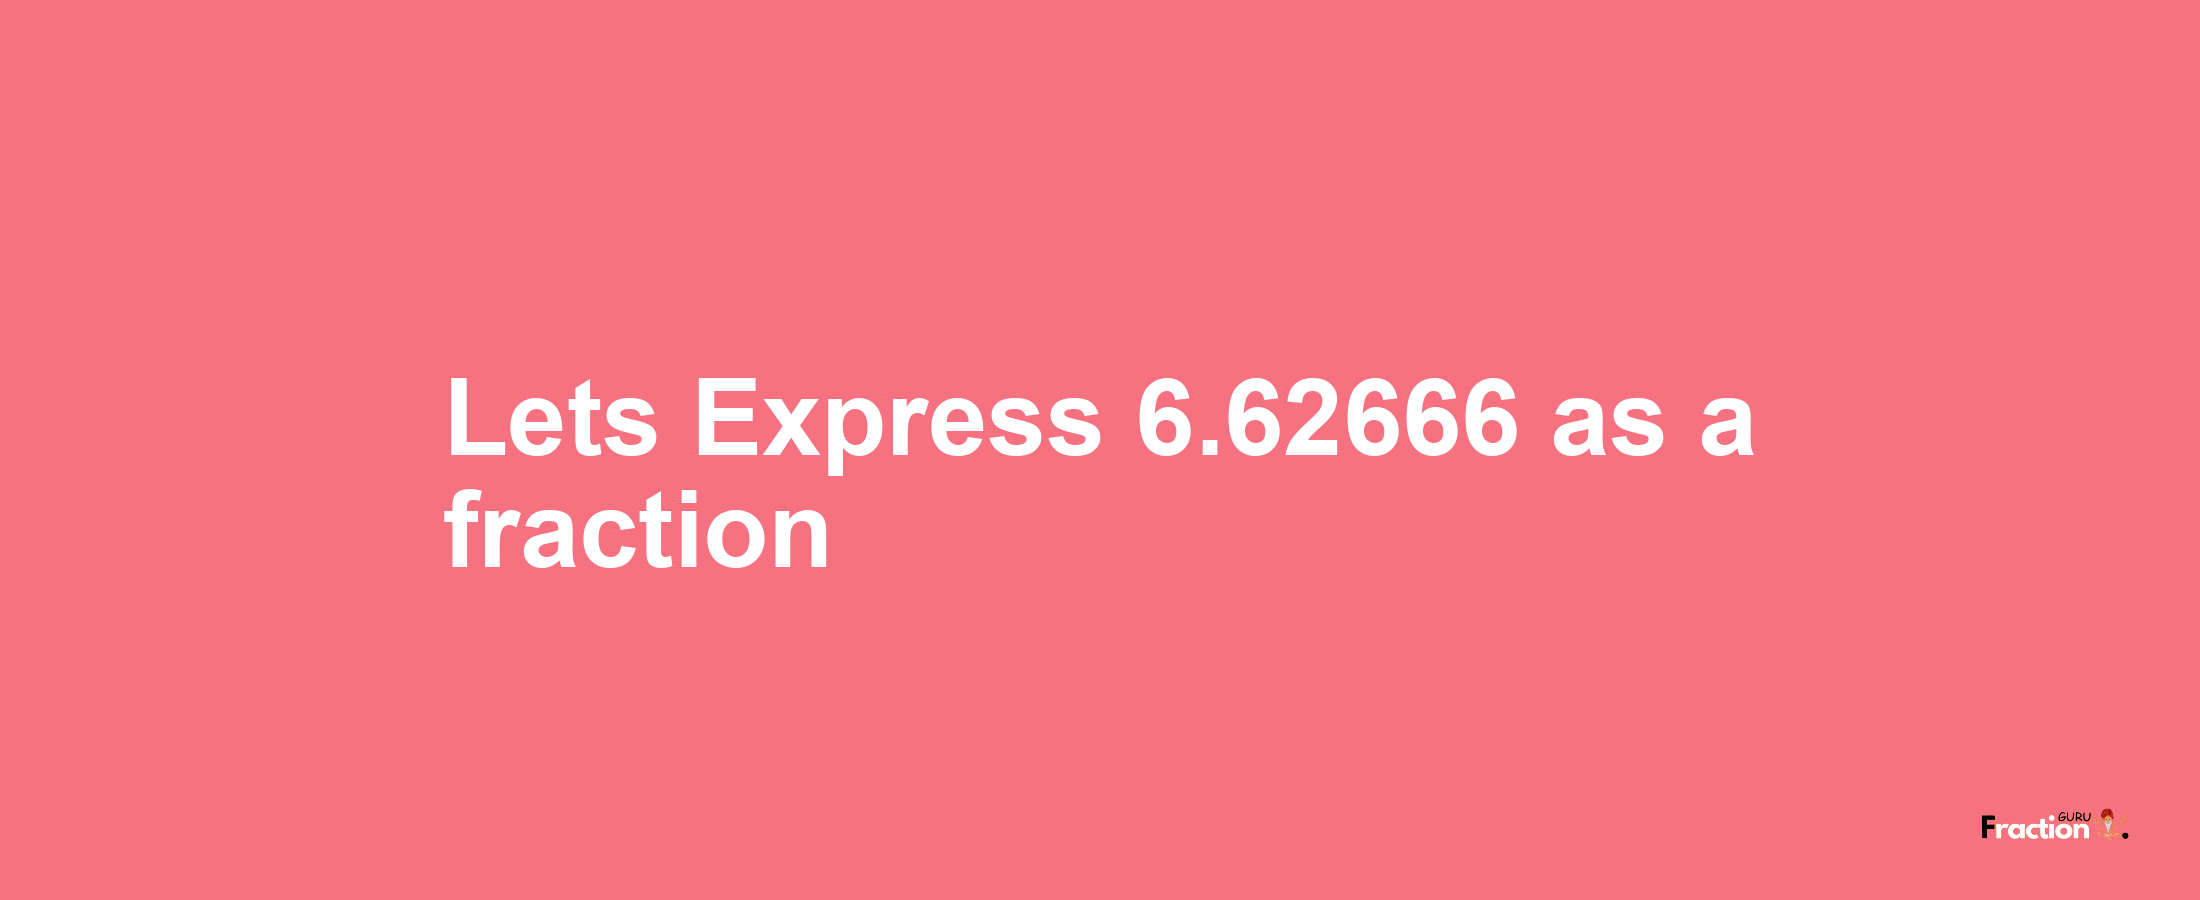 Lets Express 6.62666 as afraction